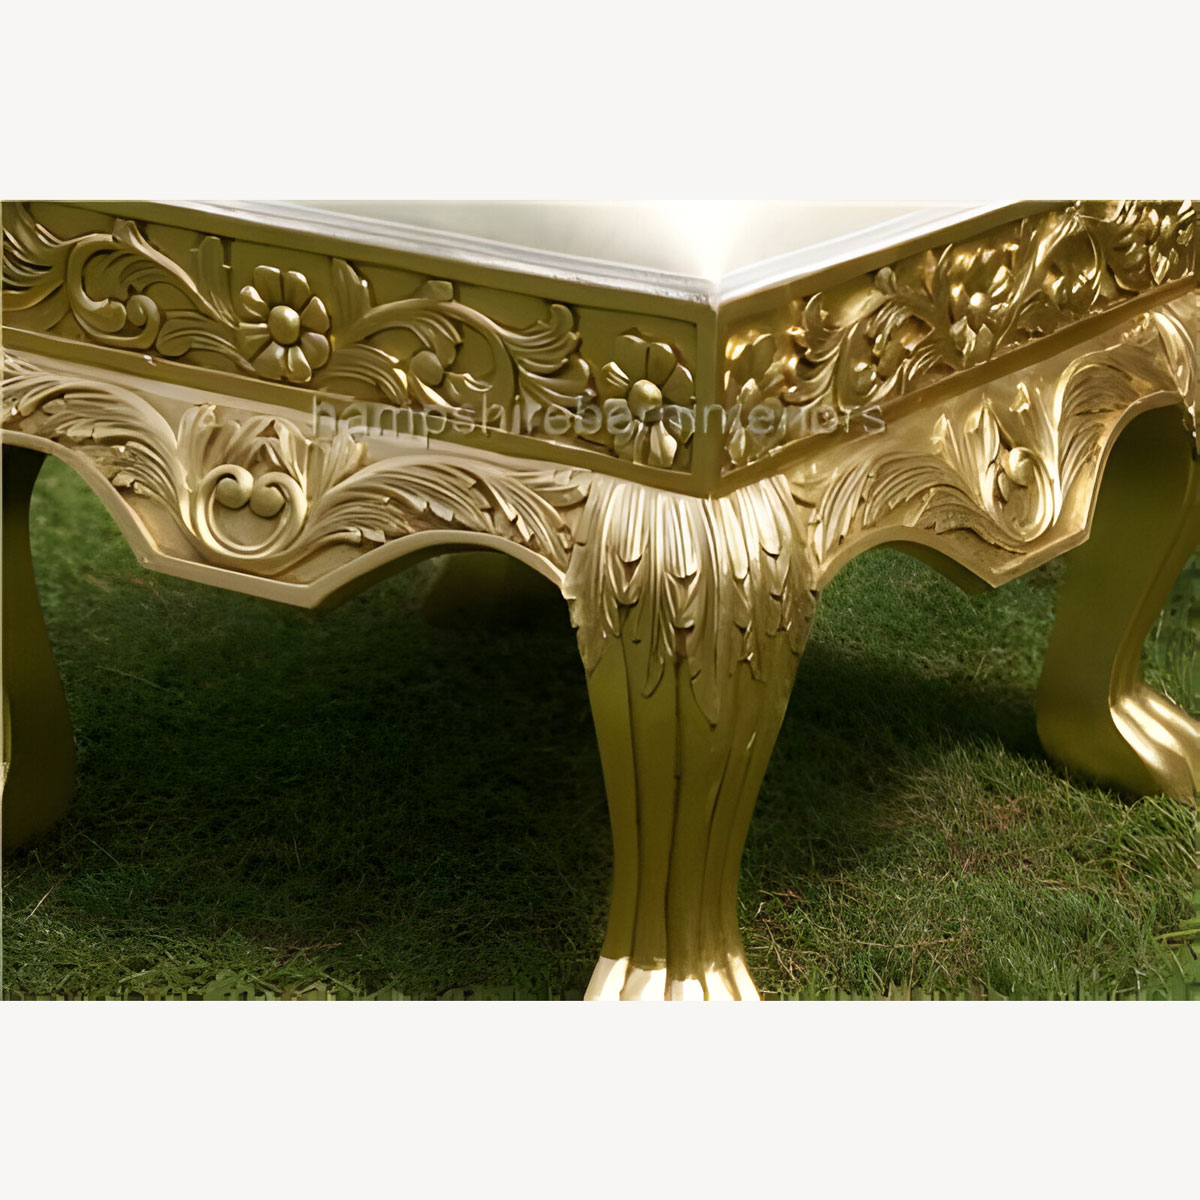 A Gold Leaf Heavily Carved Wedding Or Event Or Home Stool Ottoman Seat 6 - Hampshire Barn Interiors - A Gold Leaf Heavily Carved Wedding Or Event Or Home Stool / Ottoman Seat -